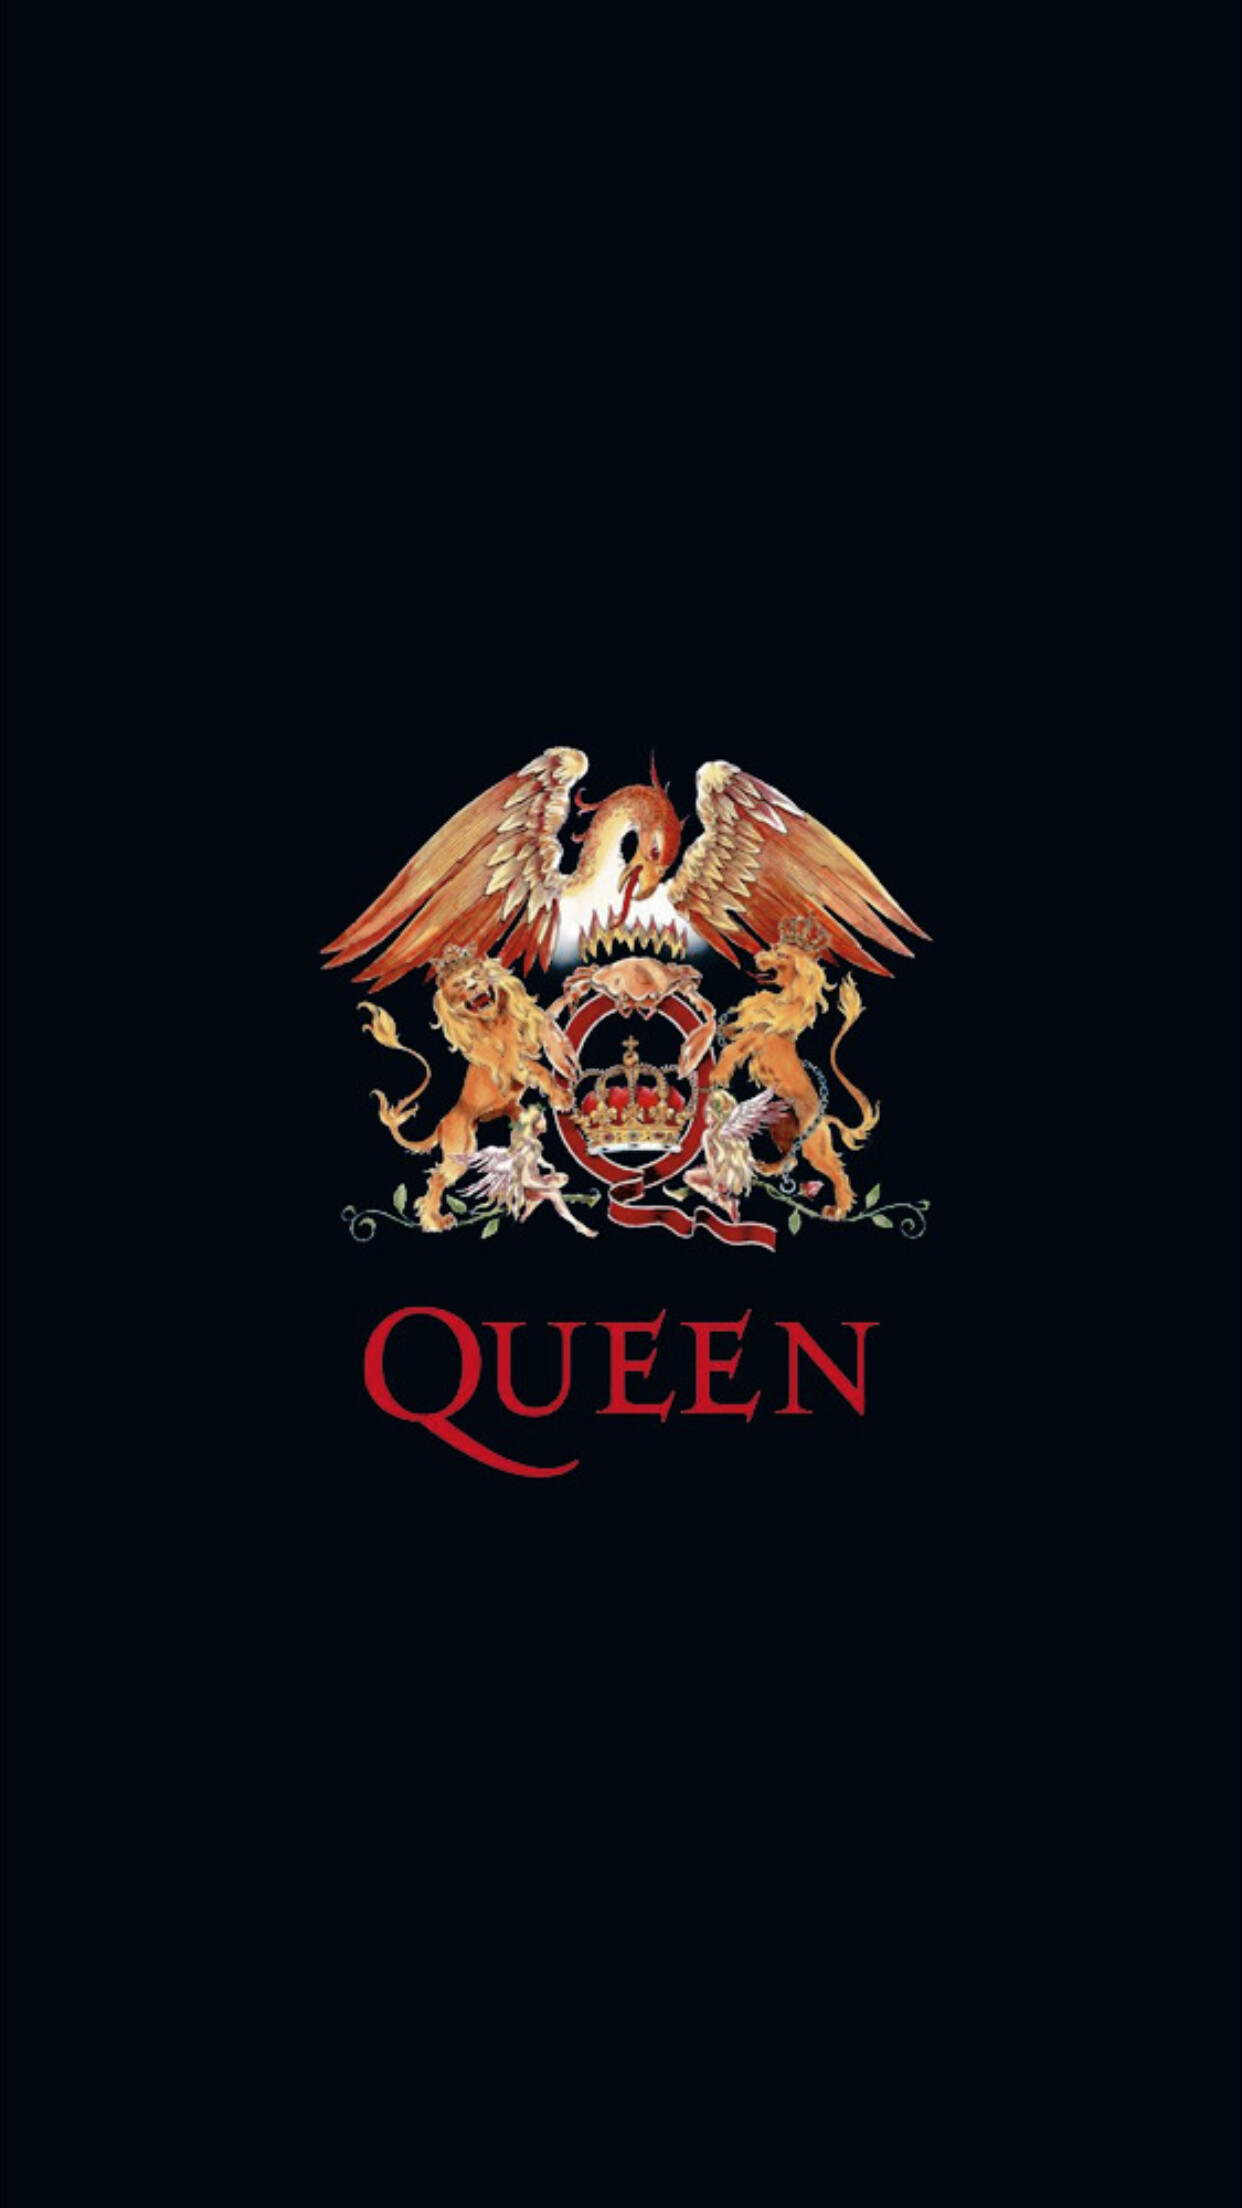 Queen rock pioneers, Freddie Mercury tribute, Band logo, Anthems for generations, 1250x2210 HD Phone